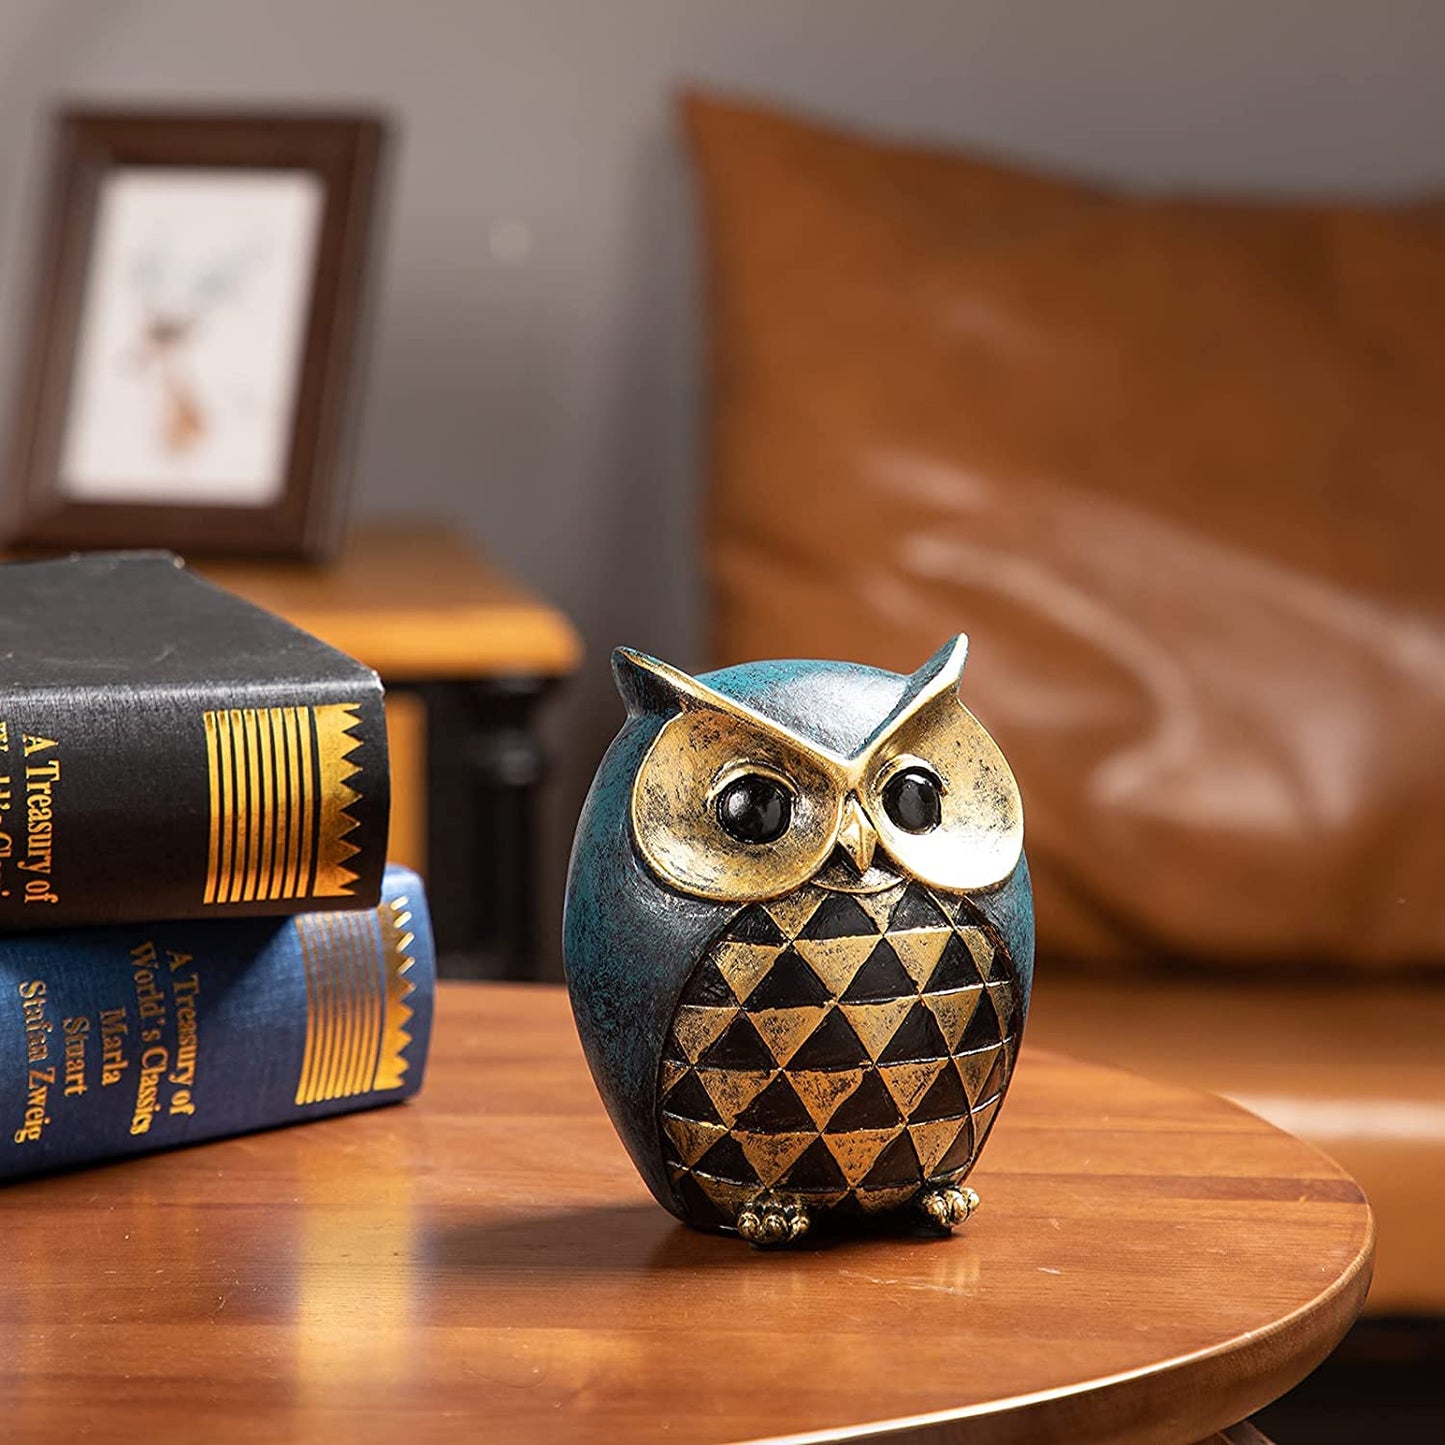 Owl Statue Home Decor,Owl Figurines for Bookshelf Bedroom Living Room Office TV Stand Decorations,Owl décor Animal Sculptures Gift for Birds Lovers